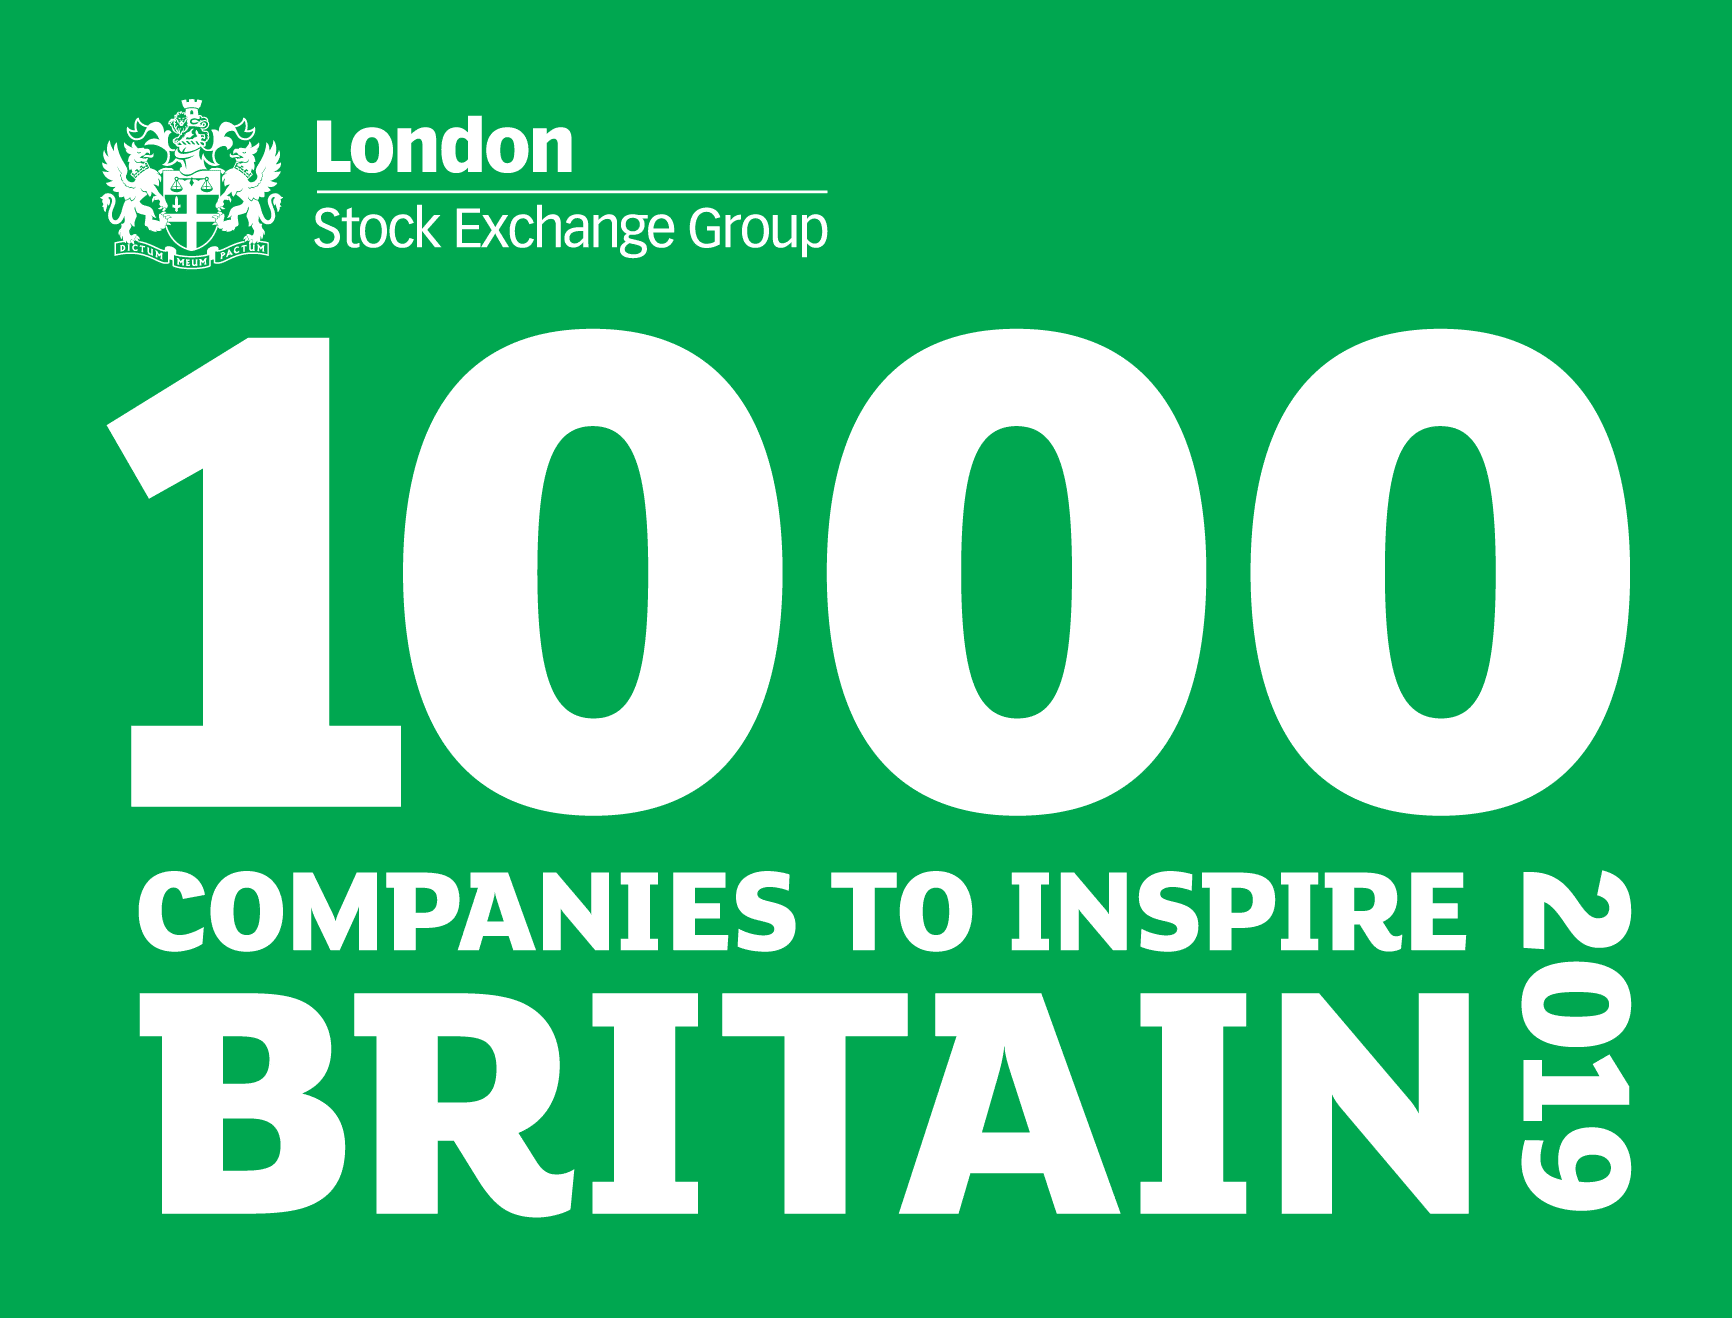 London Stock Exchange Group's '1000 Companies to Inspire Britain 2019'